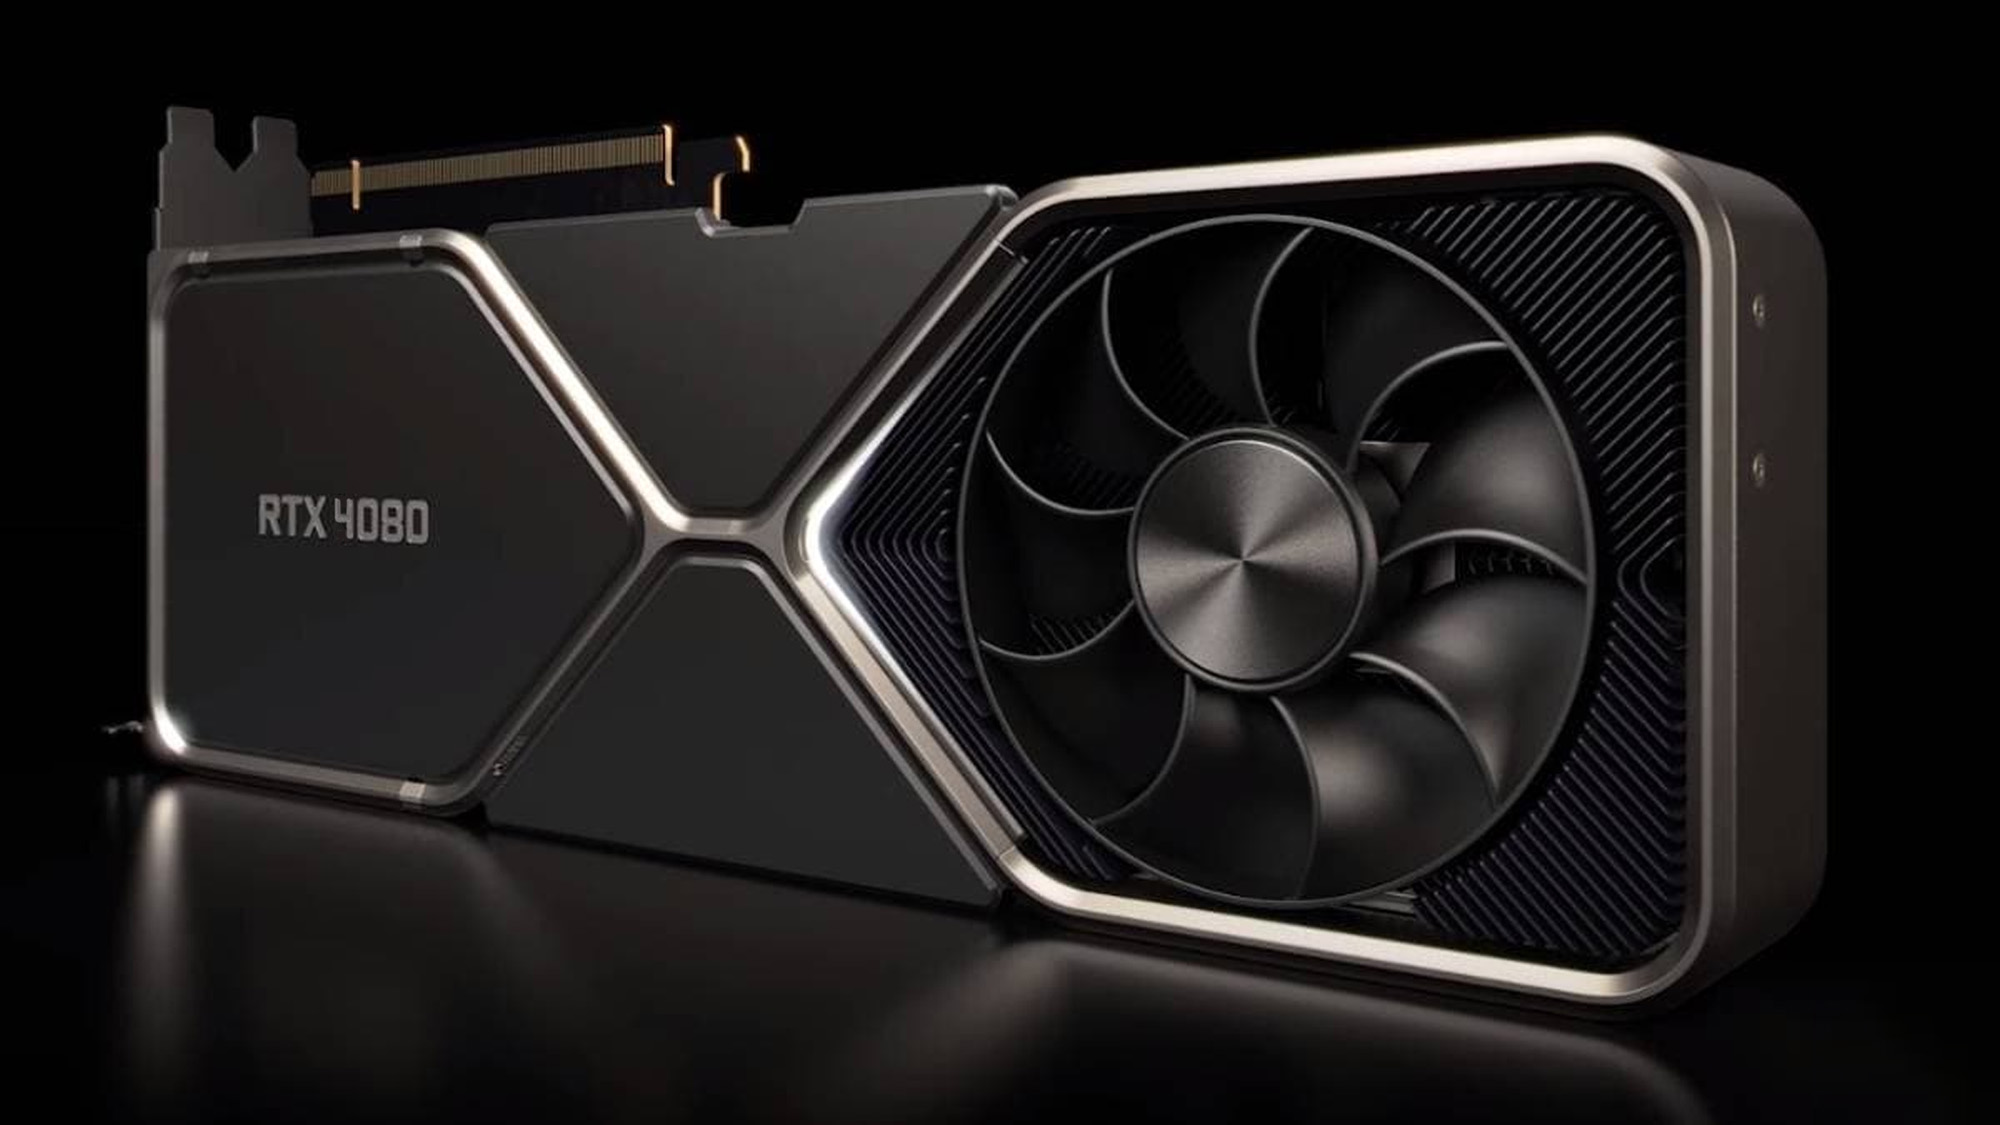 A mockup of what the RTX 4080 could look like